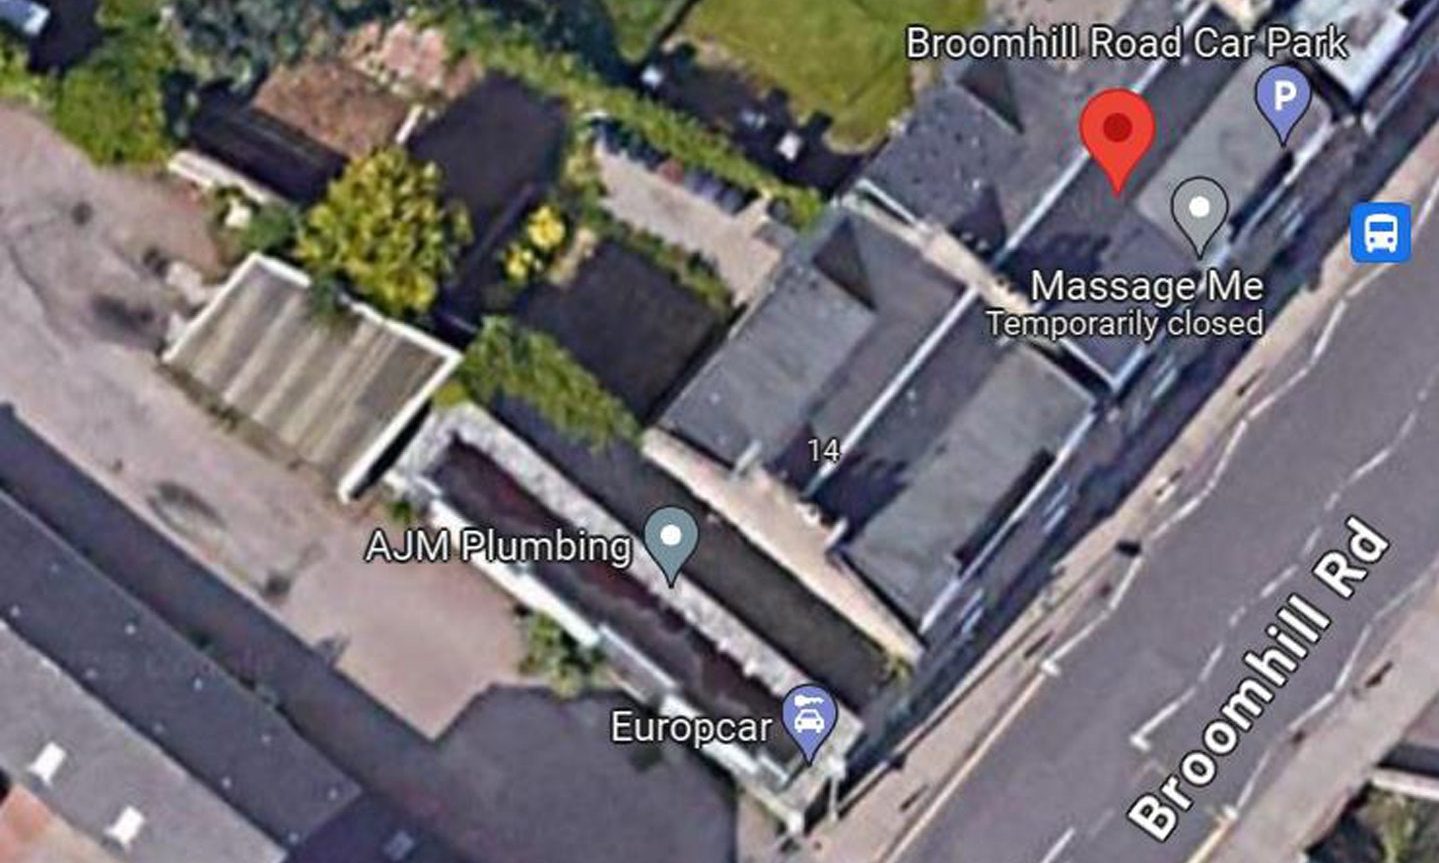 The flats on broomhill road on a map